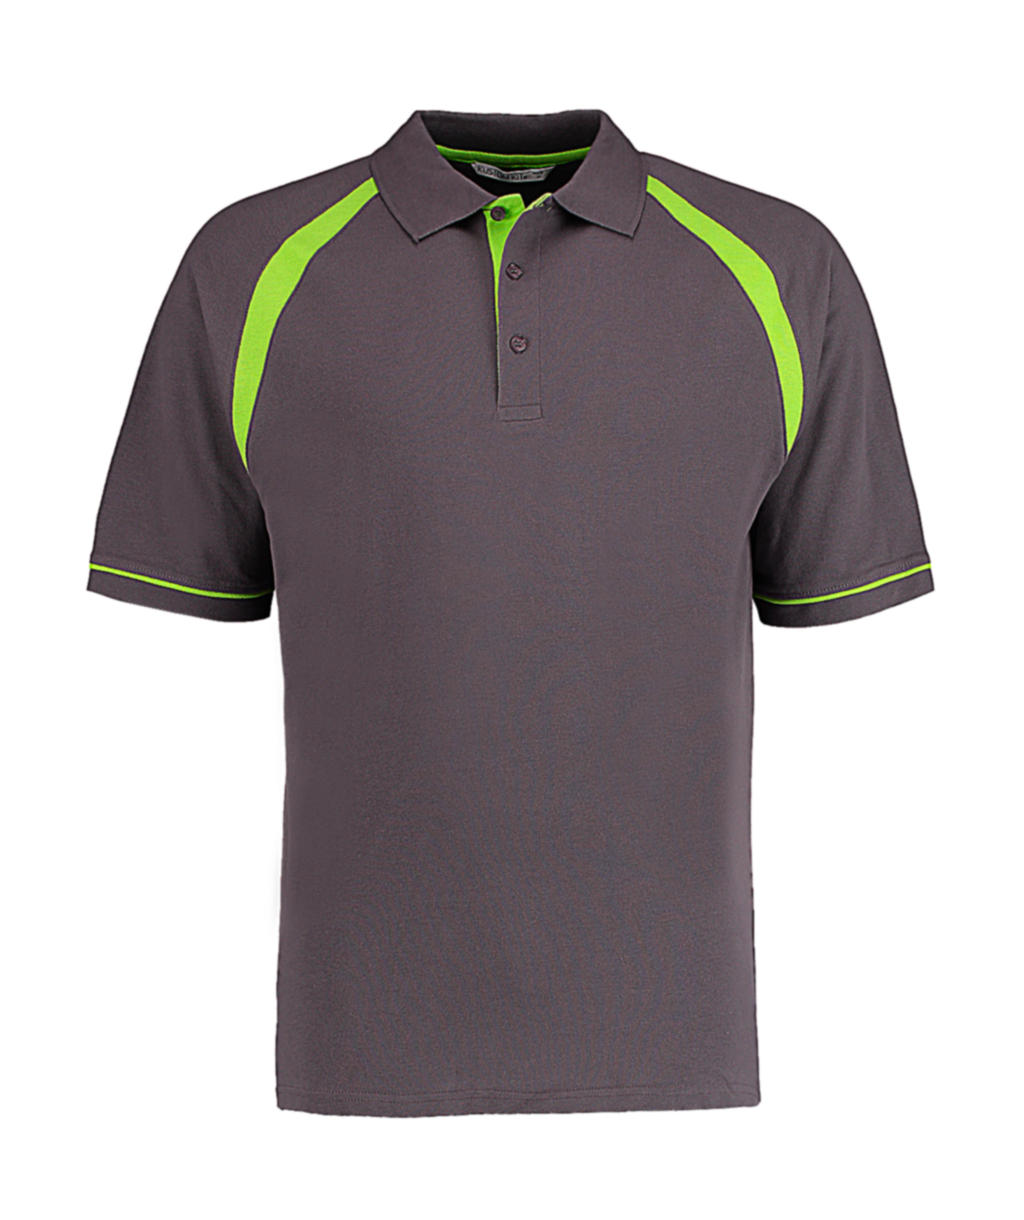  Classic Fit Oak Hill Polo in Farbe Charcoal/Lime